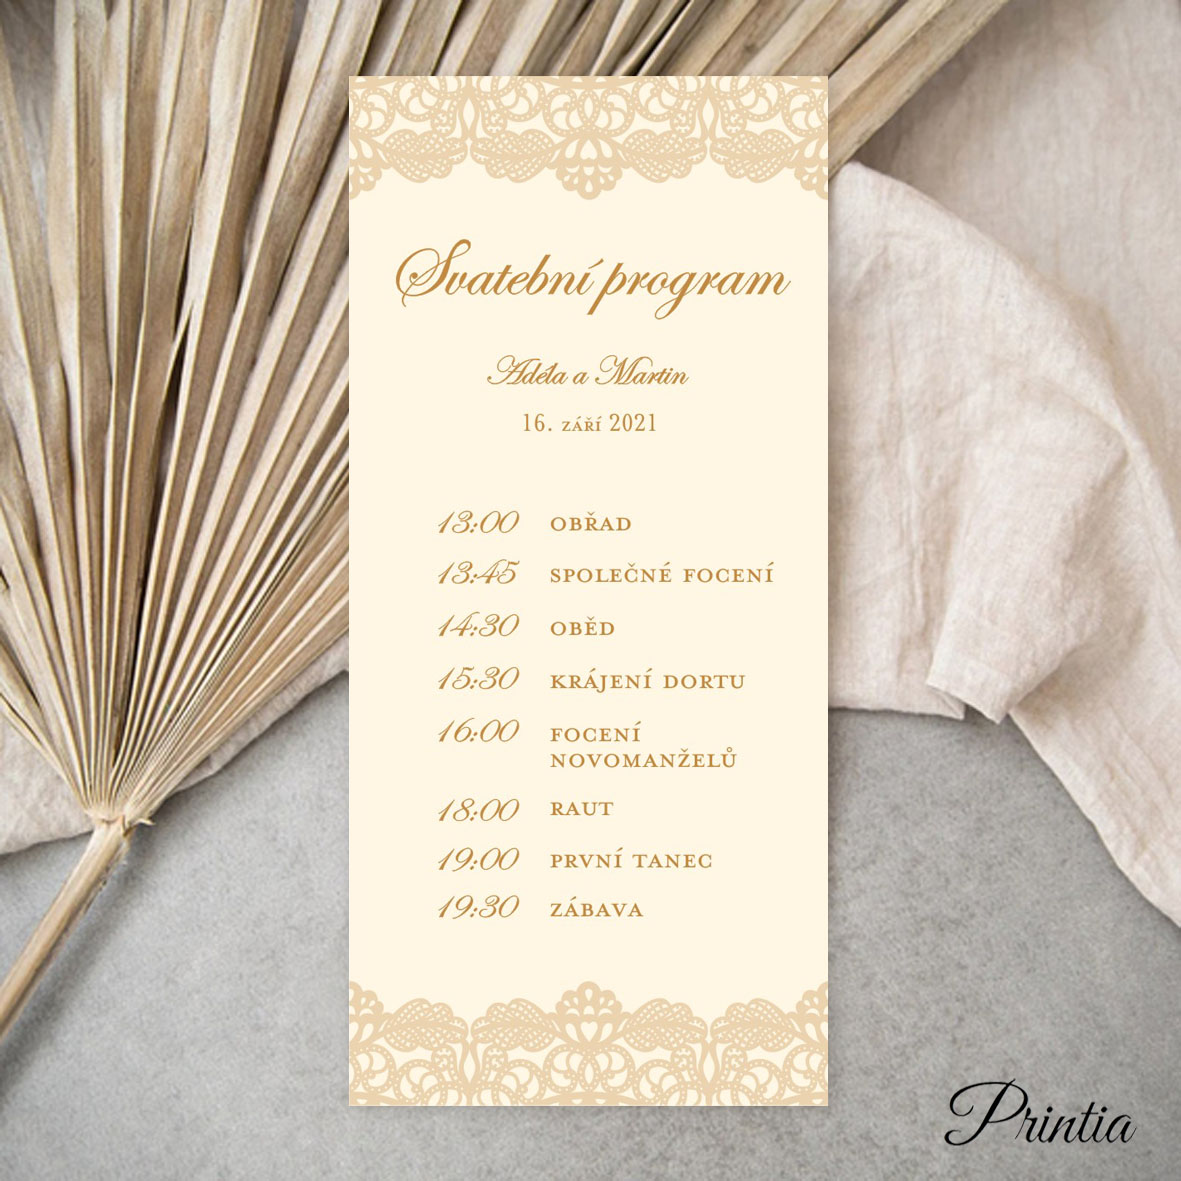 Wedding timeline with printed ornament